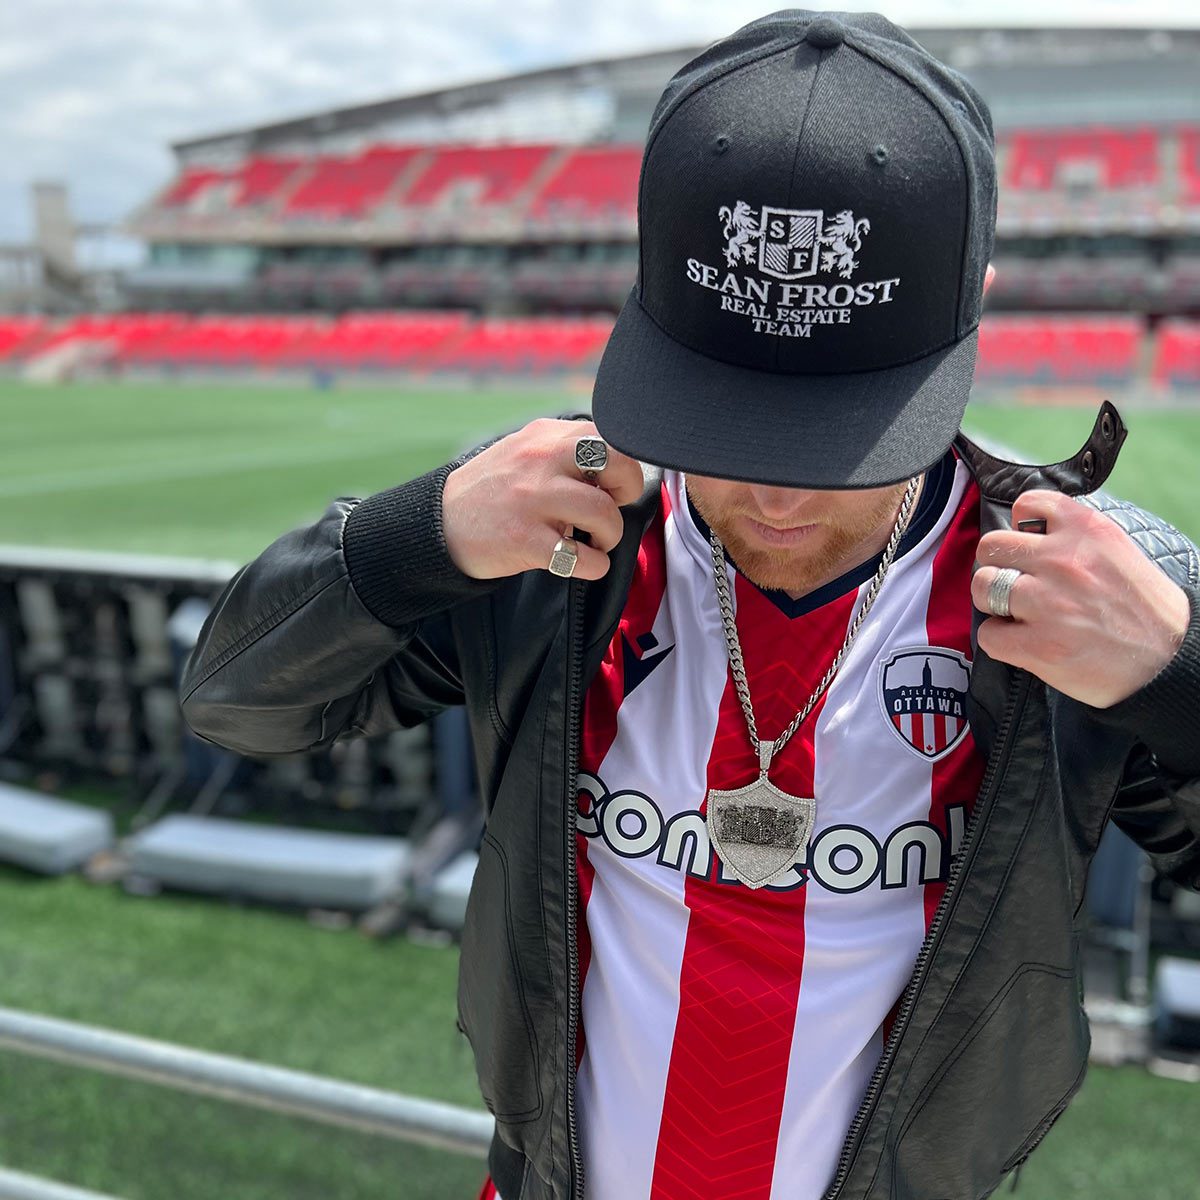 Ottawa music exec & business owner Sean Frost announces partnership with pro soccer club Atlético Ottawa